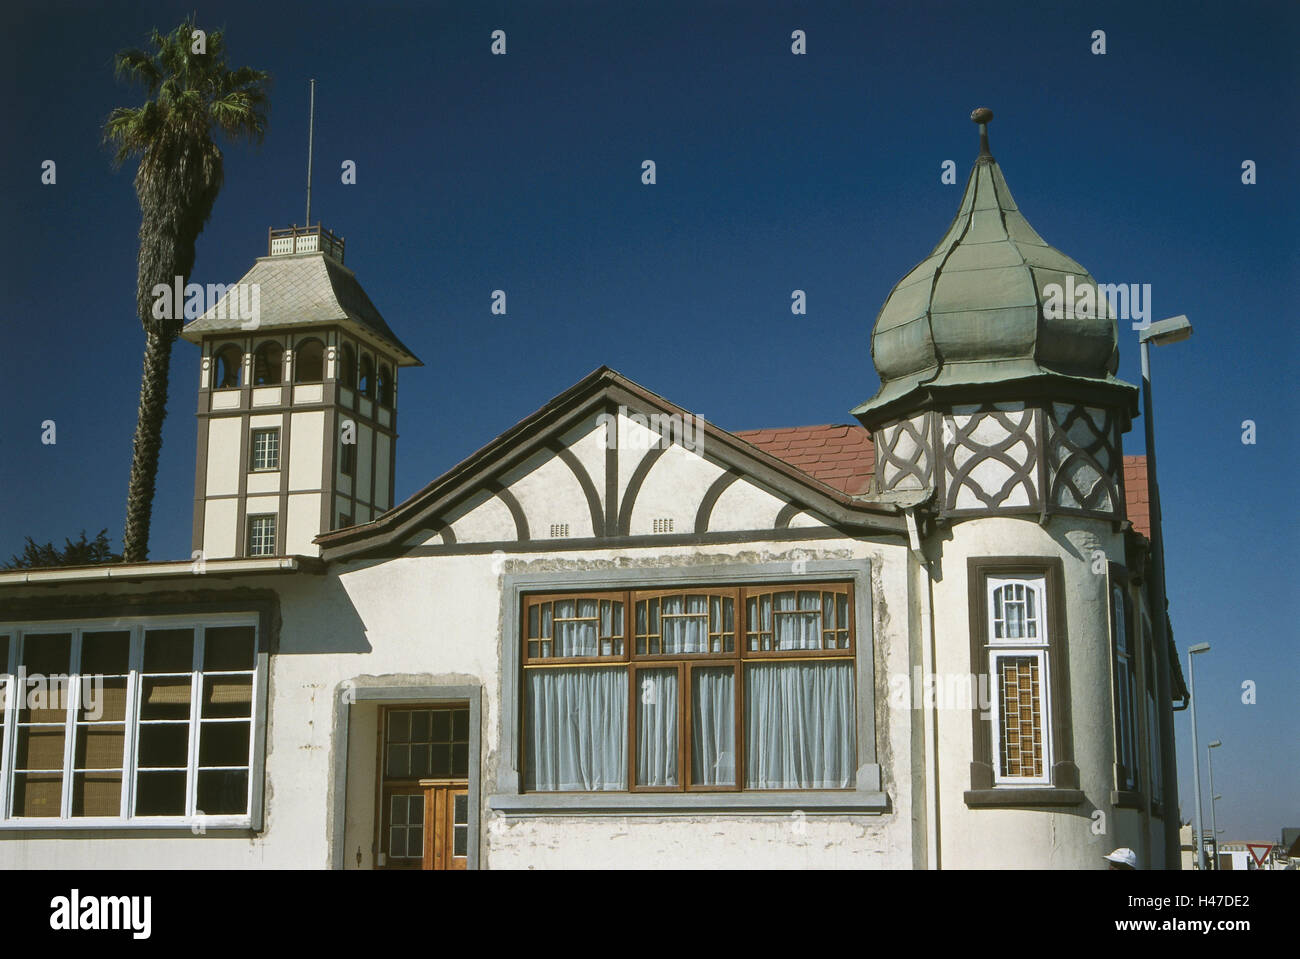 Namibia, Swakopmund, house, colonial style, Africa, South-West, Africa